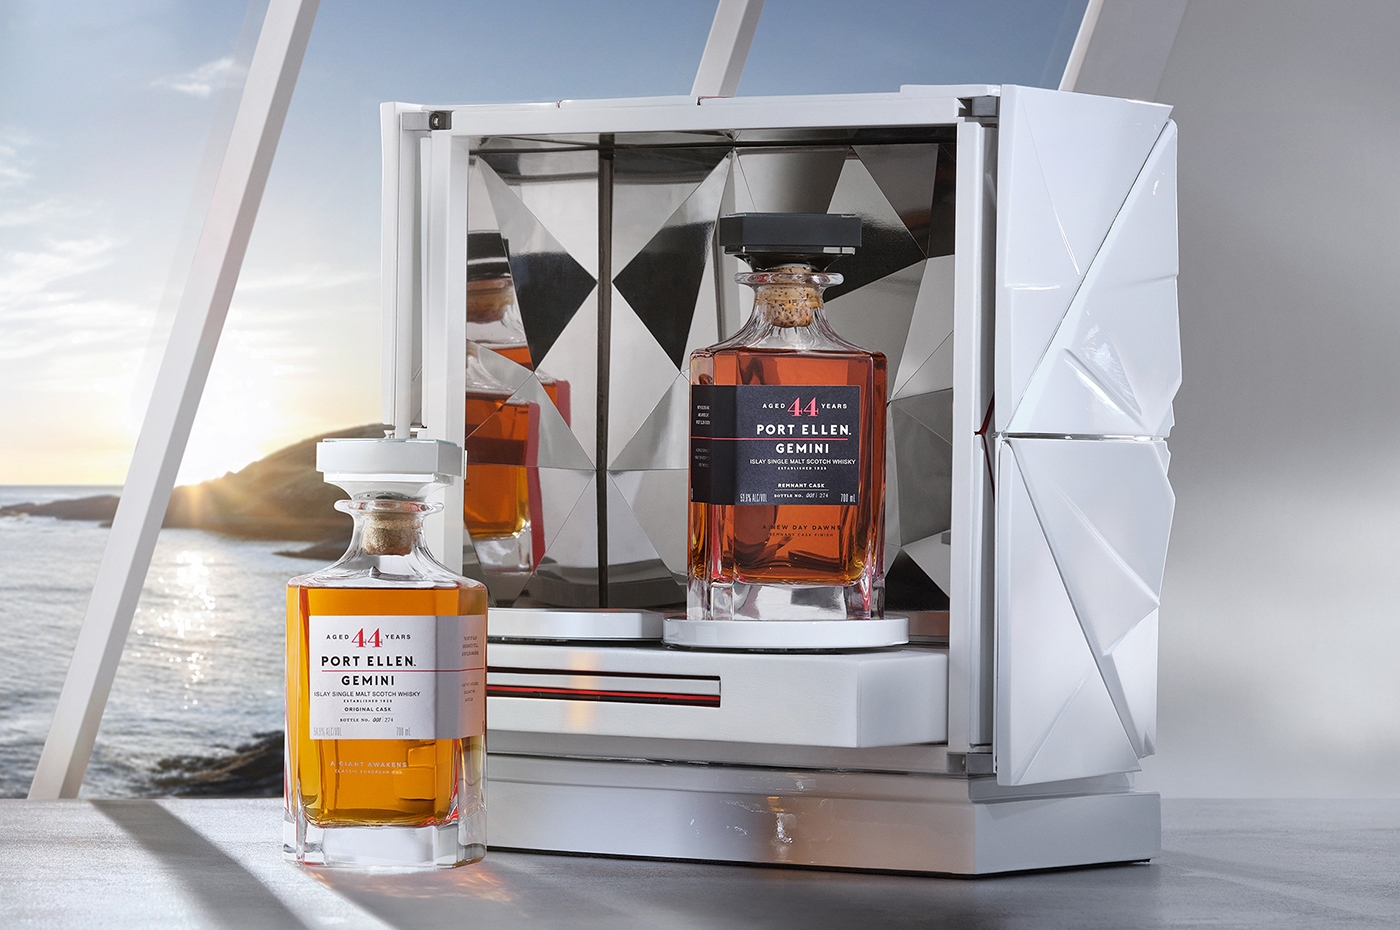 twin port ellen gemini whisky bottles in front of a white case and window with ocean view